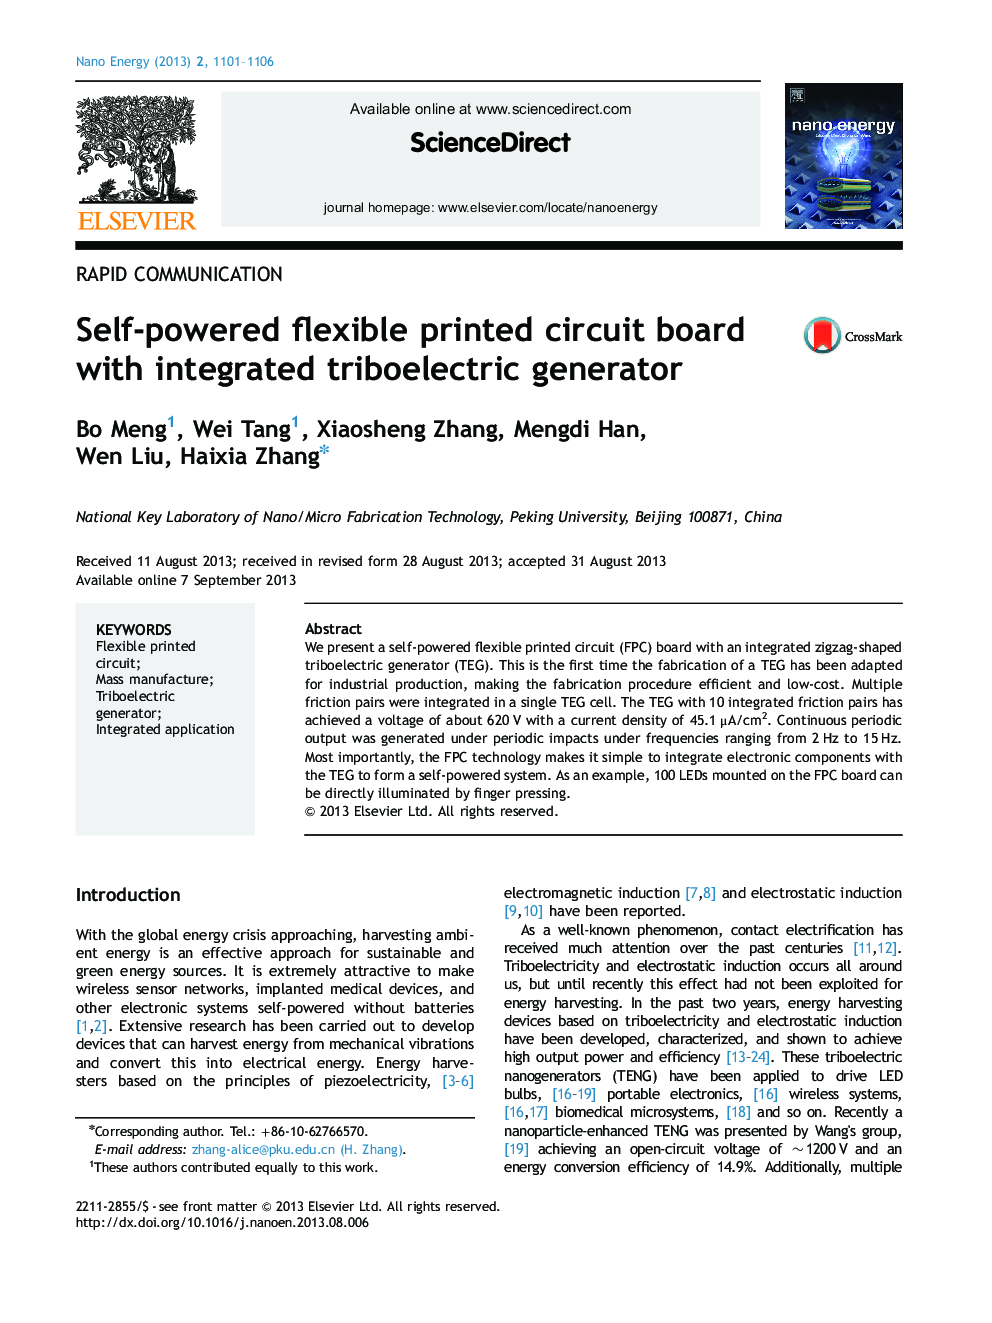 Self-powered flexible printed circuit board with integrated triboelectric generator